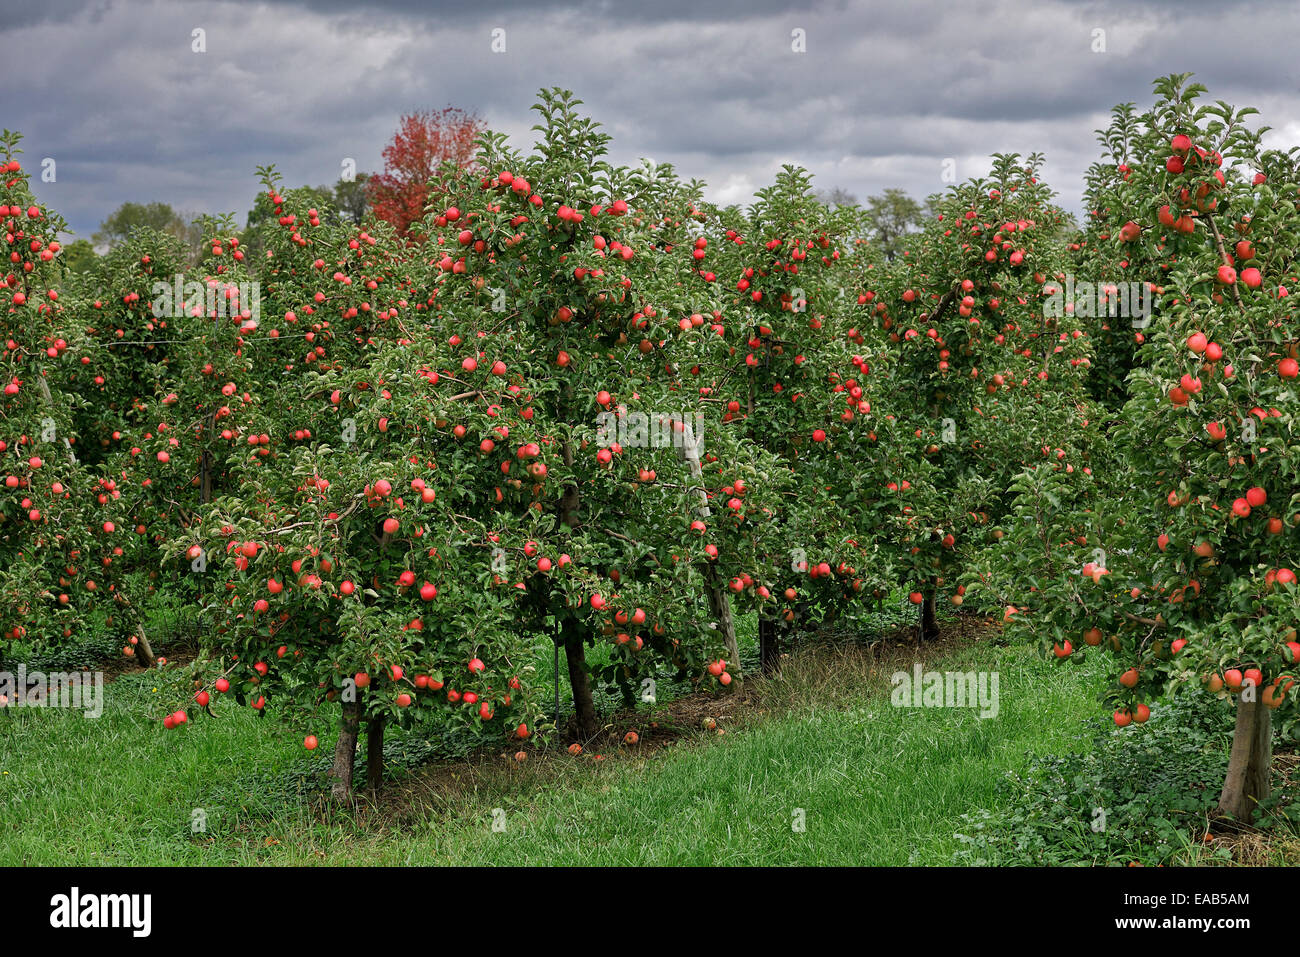 Fresh Organic Apples,apple orchard,Apple garden full of riped red apples, apples for juice,Organic red apples hanging on a tree branch,apple trees in  a row, before harvest Stock Photo by ©bondvit 142373812